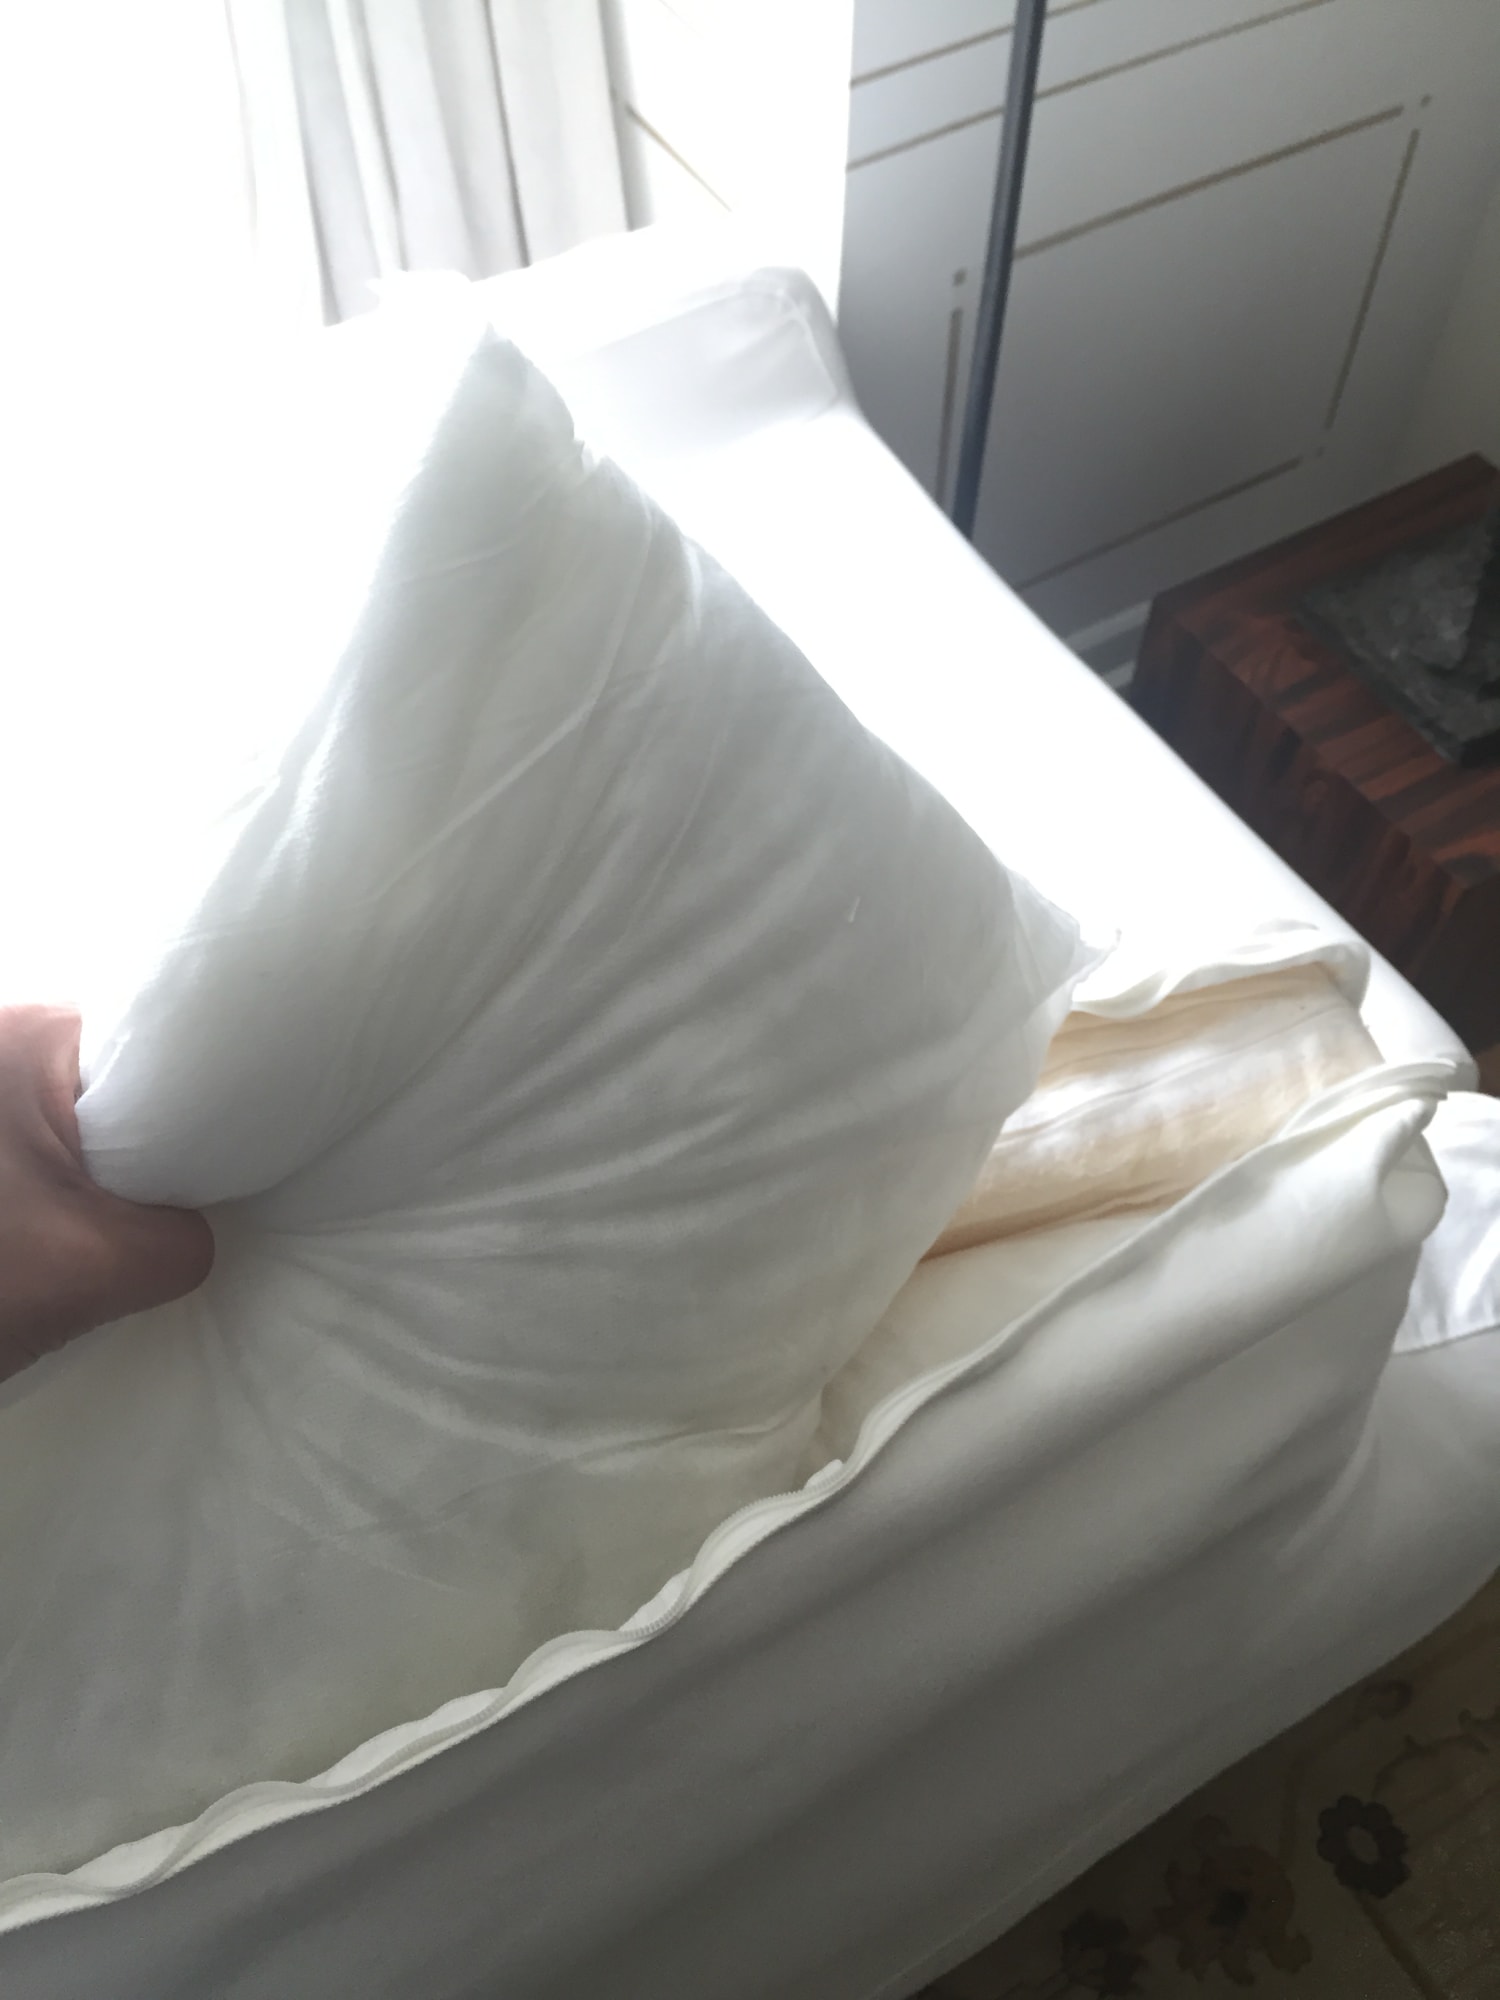 How To Fix Smashed Couch Cushions – Honey We're Home